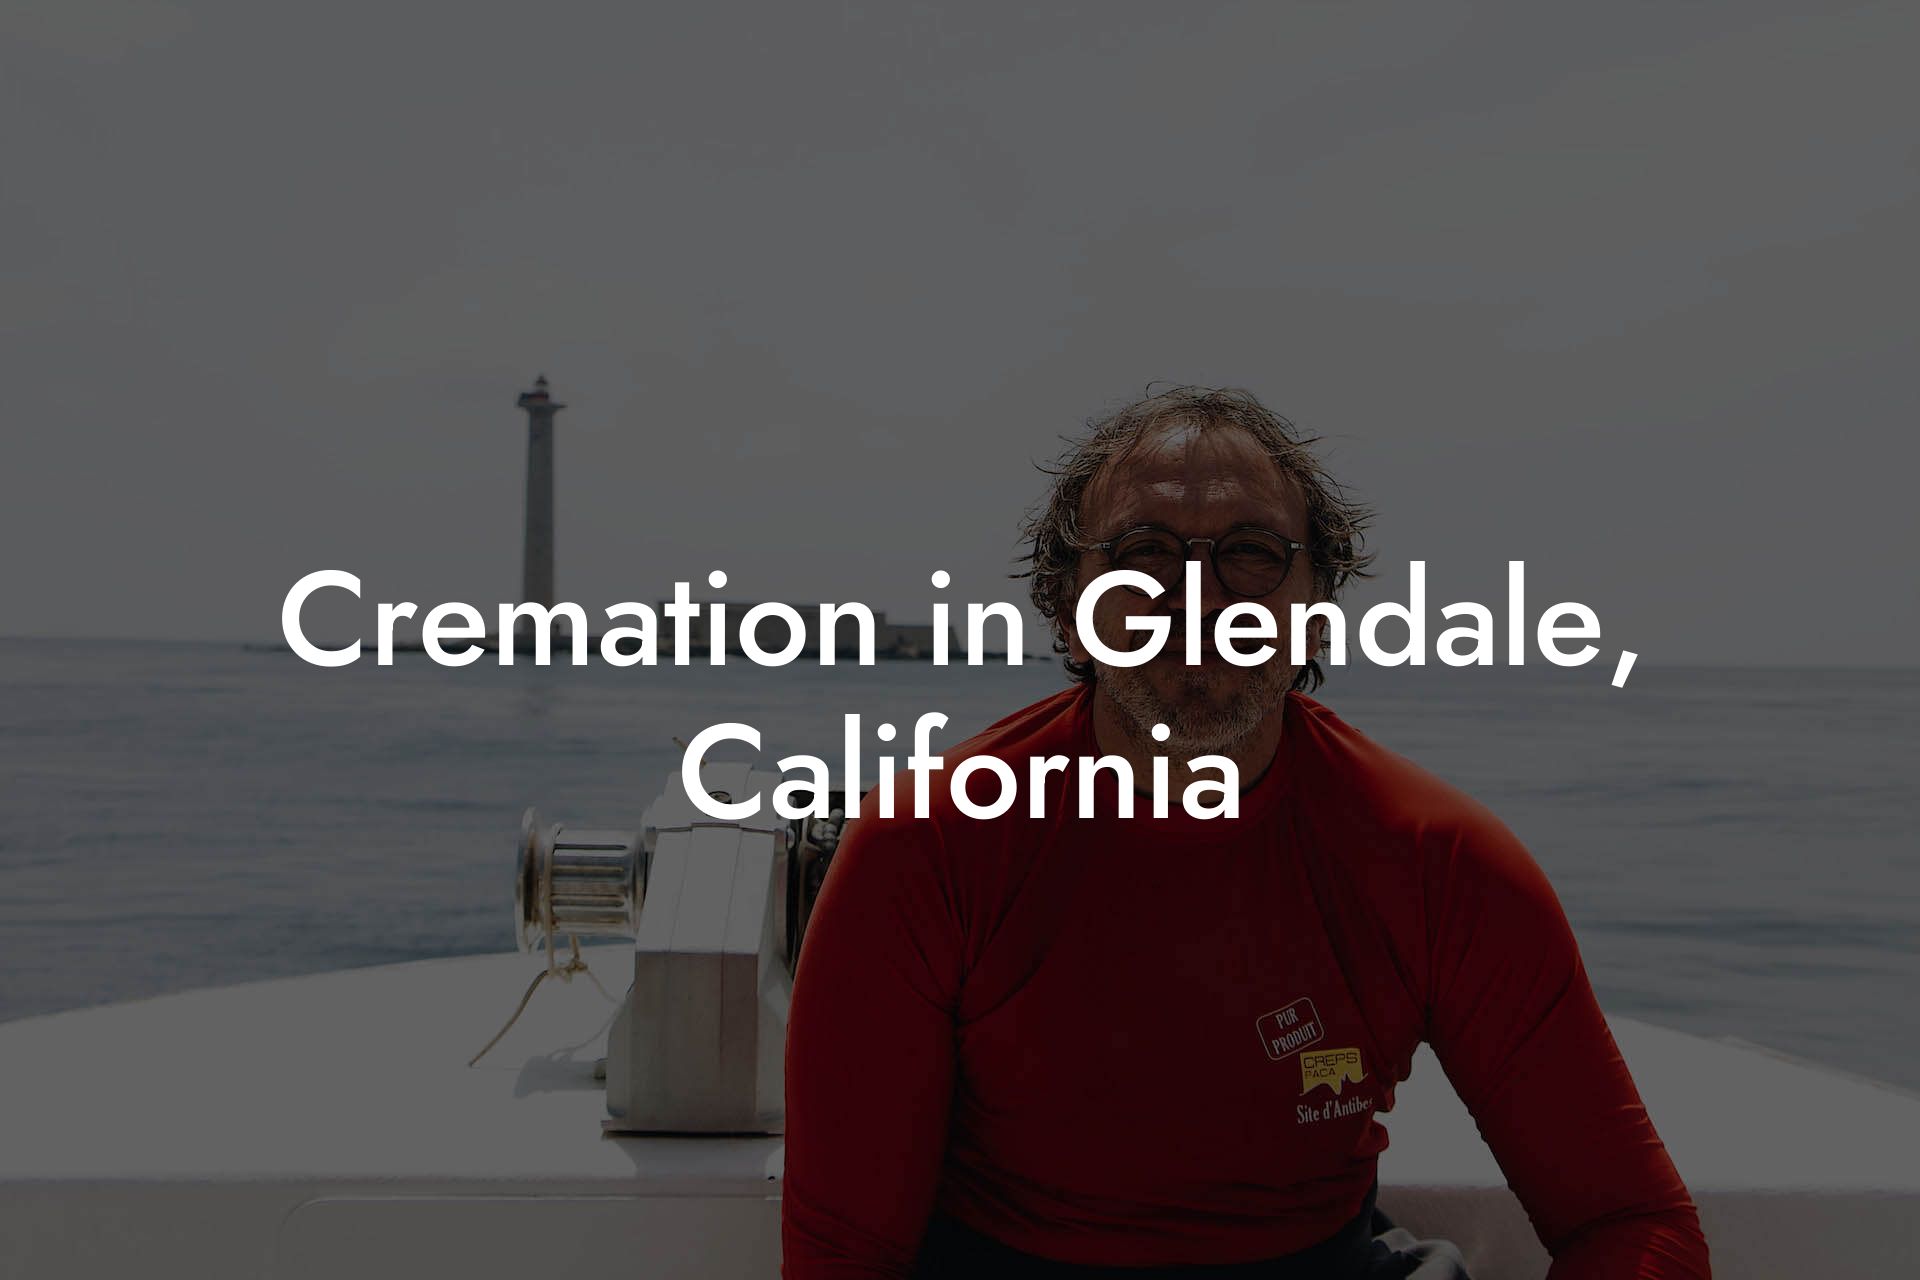 Cremation in Glendale, California